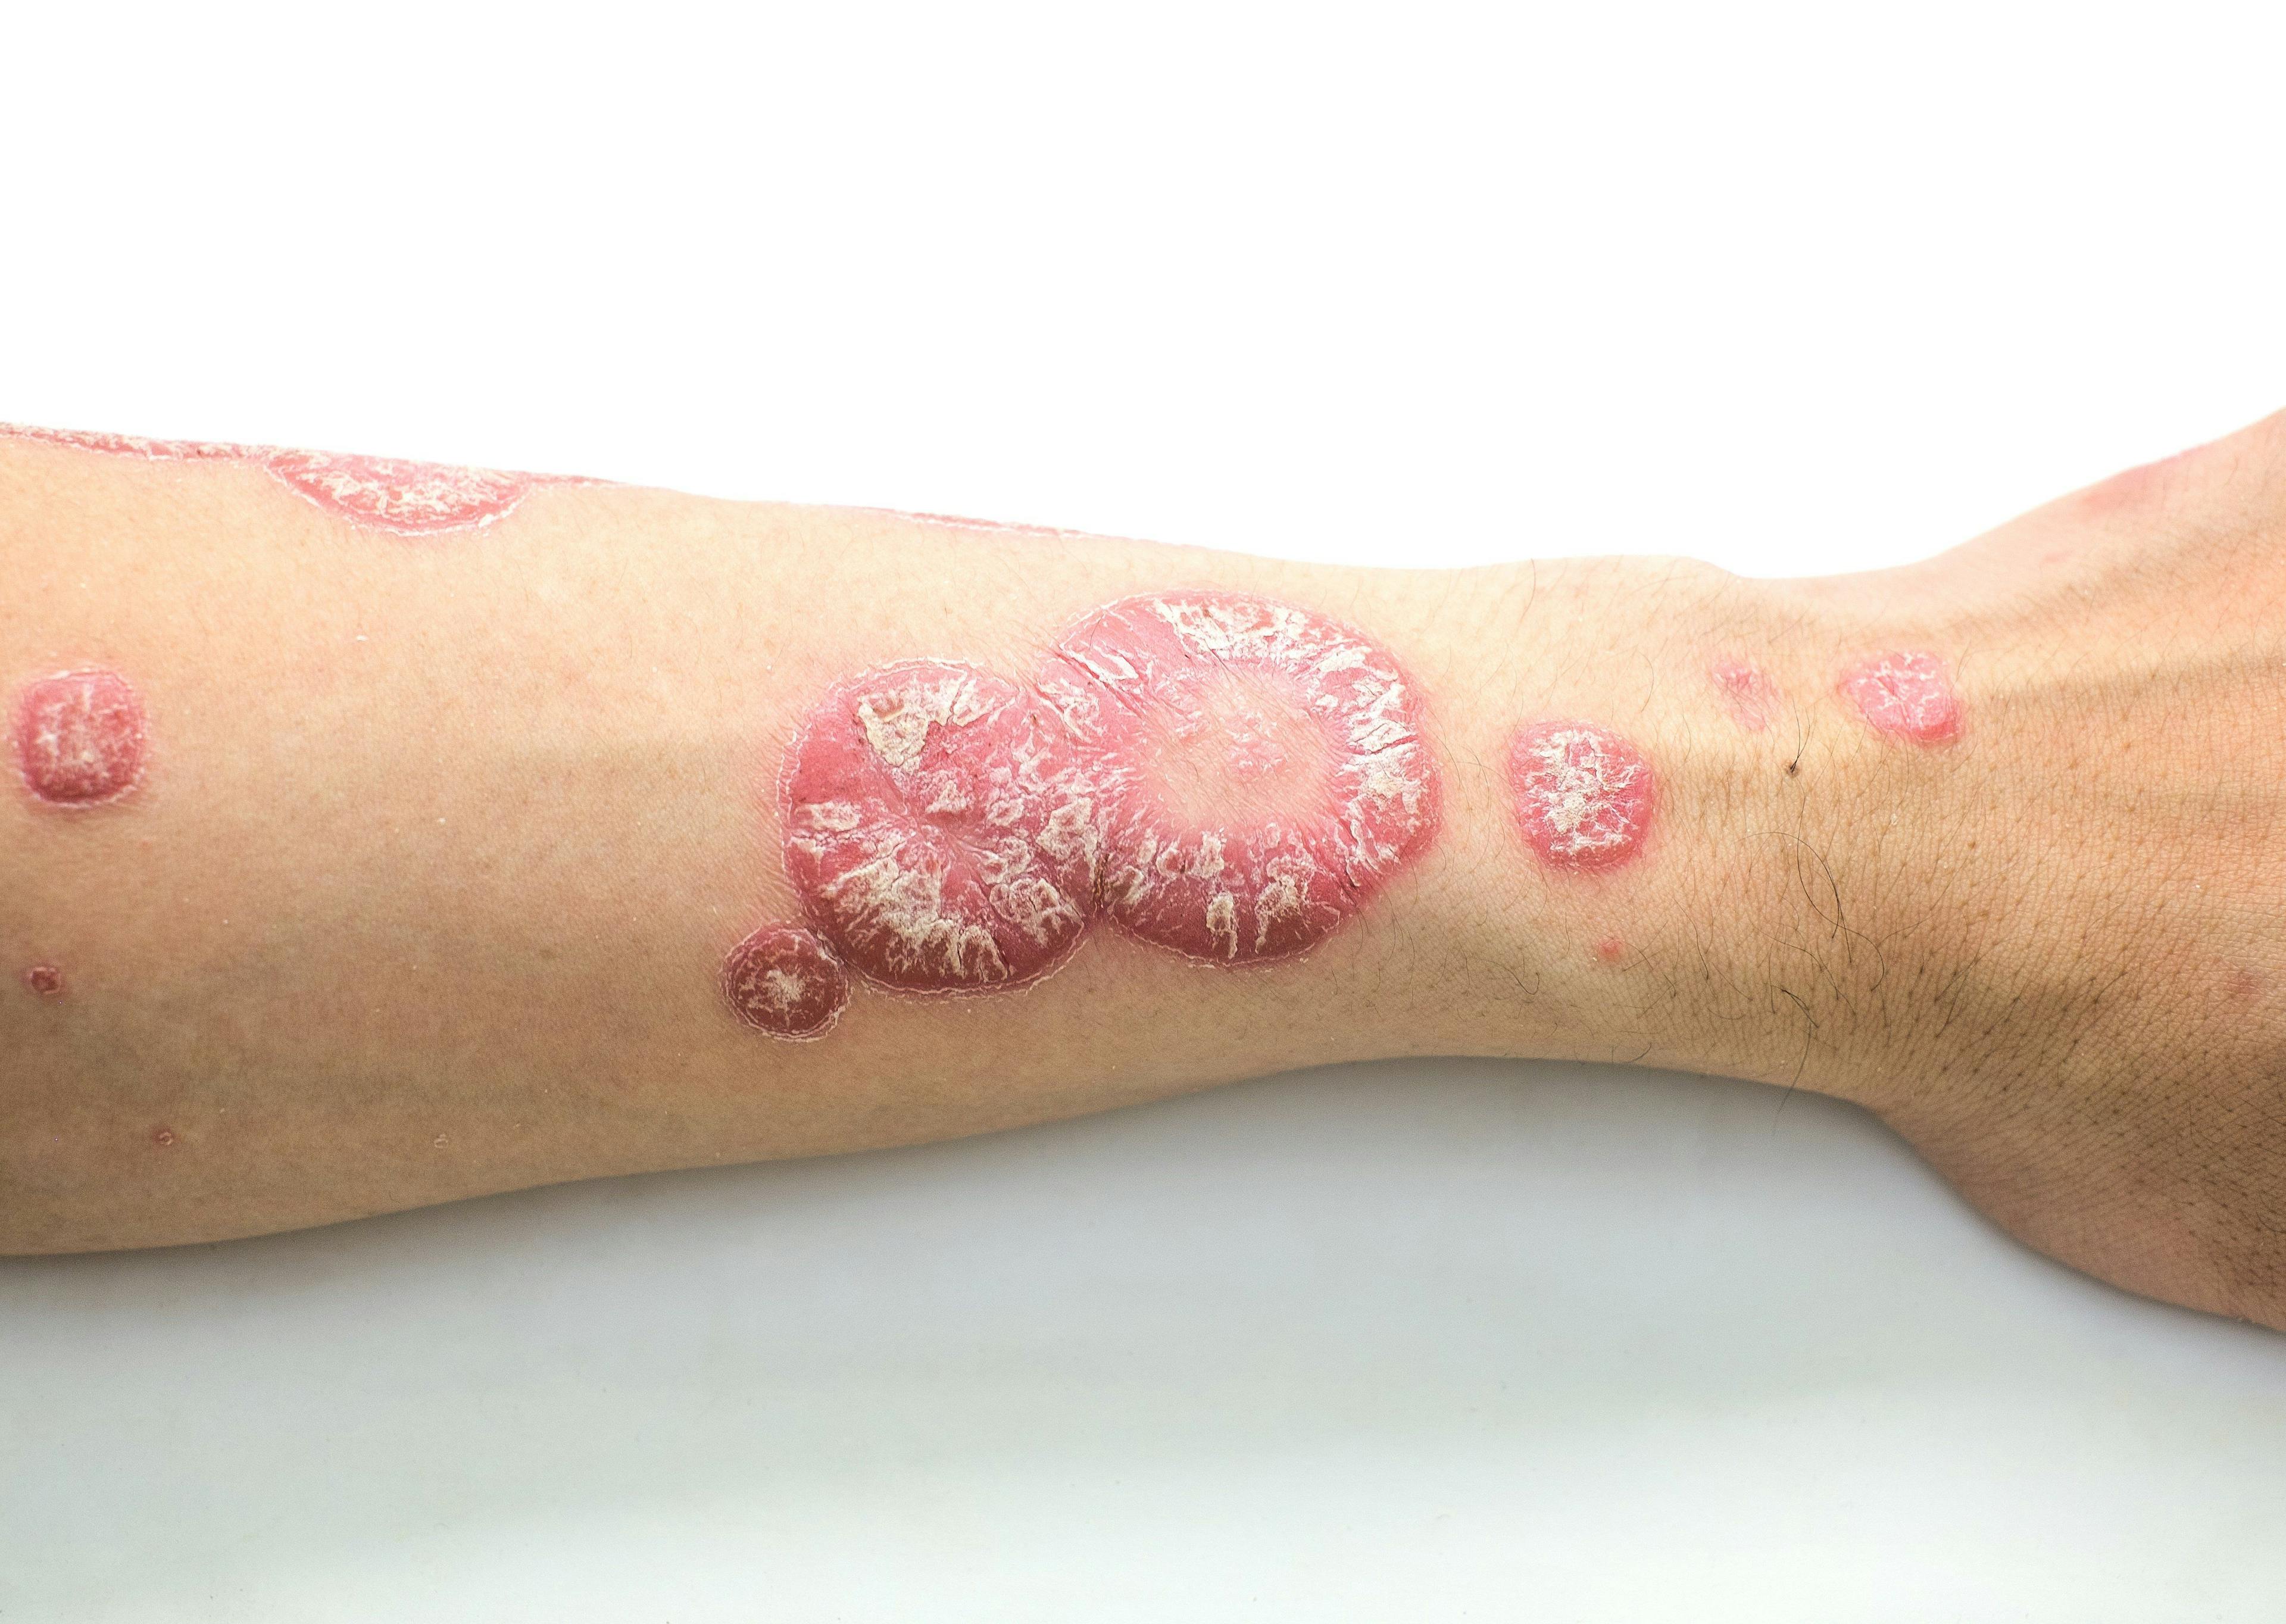 Patches of red, flaky skin on arm